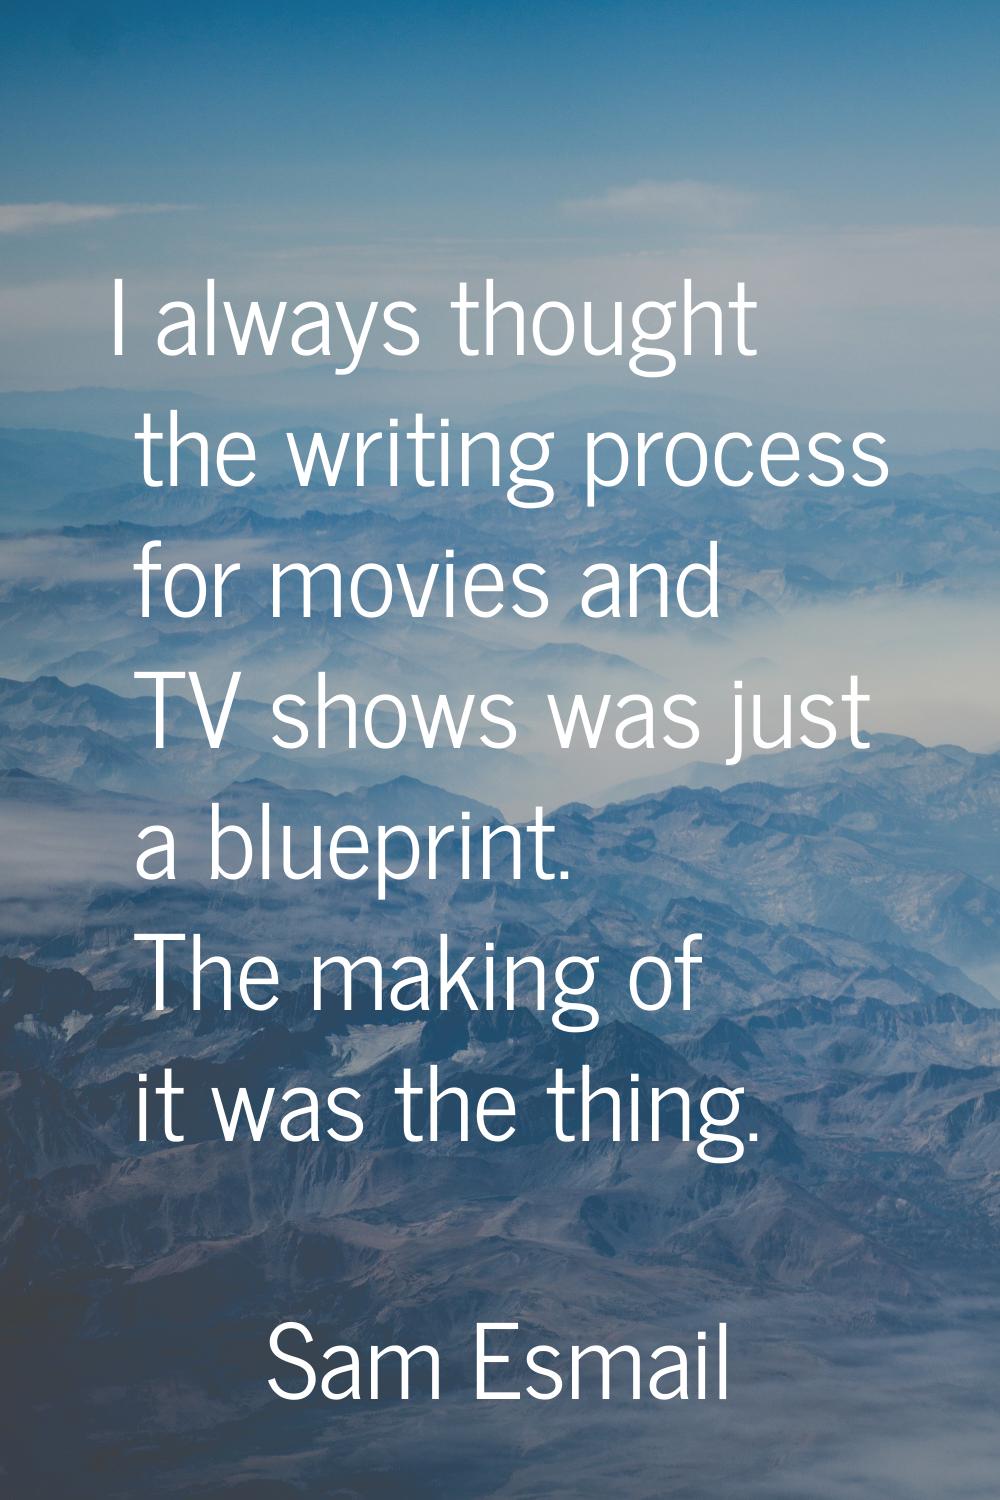 I always thought the writing process for movies and TV shows was just a blueprint. The making of it